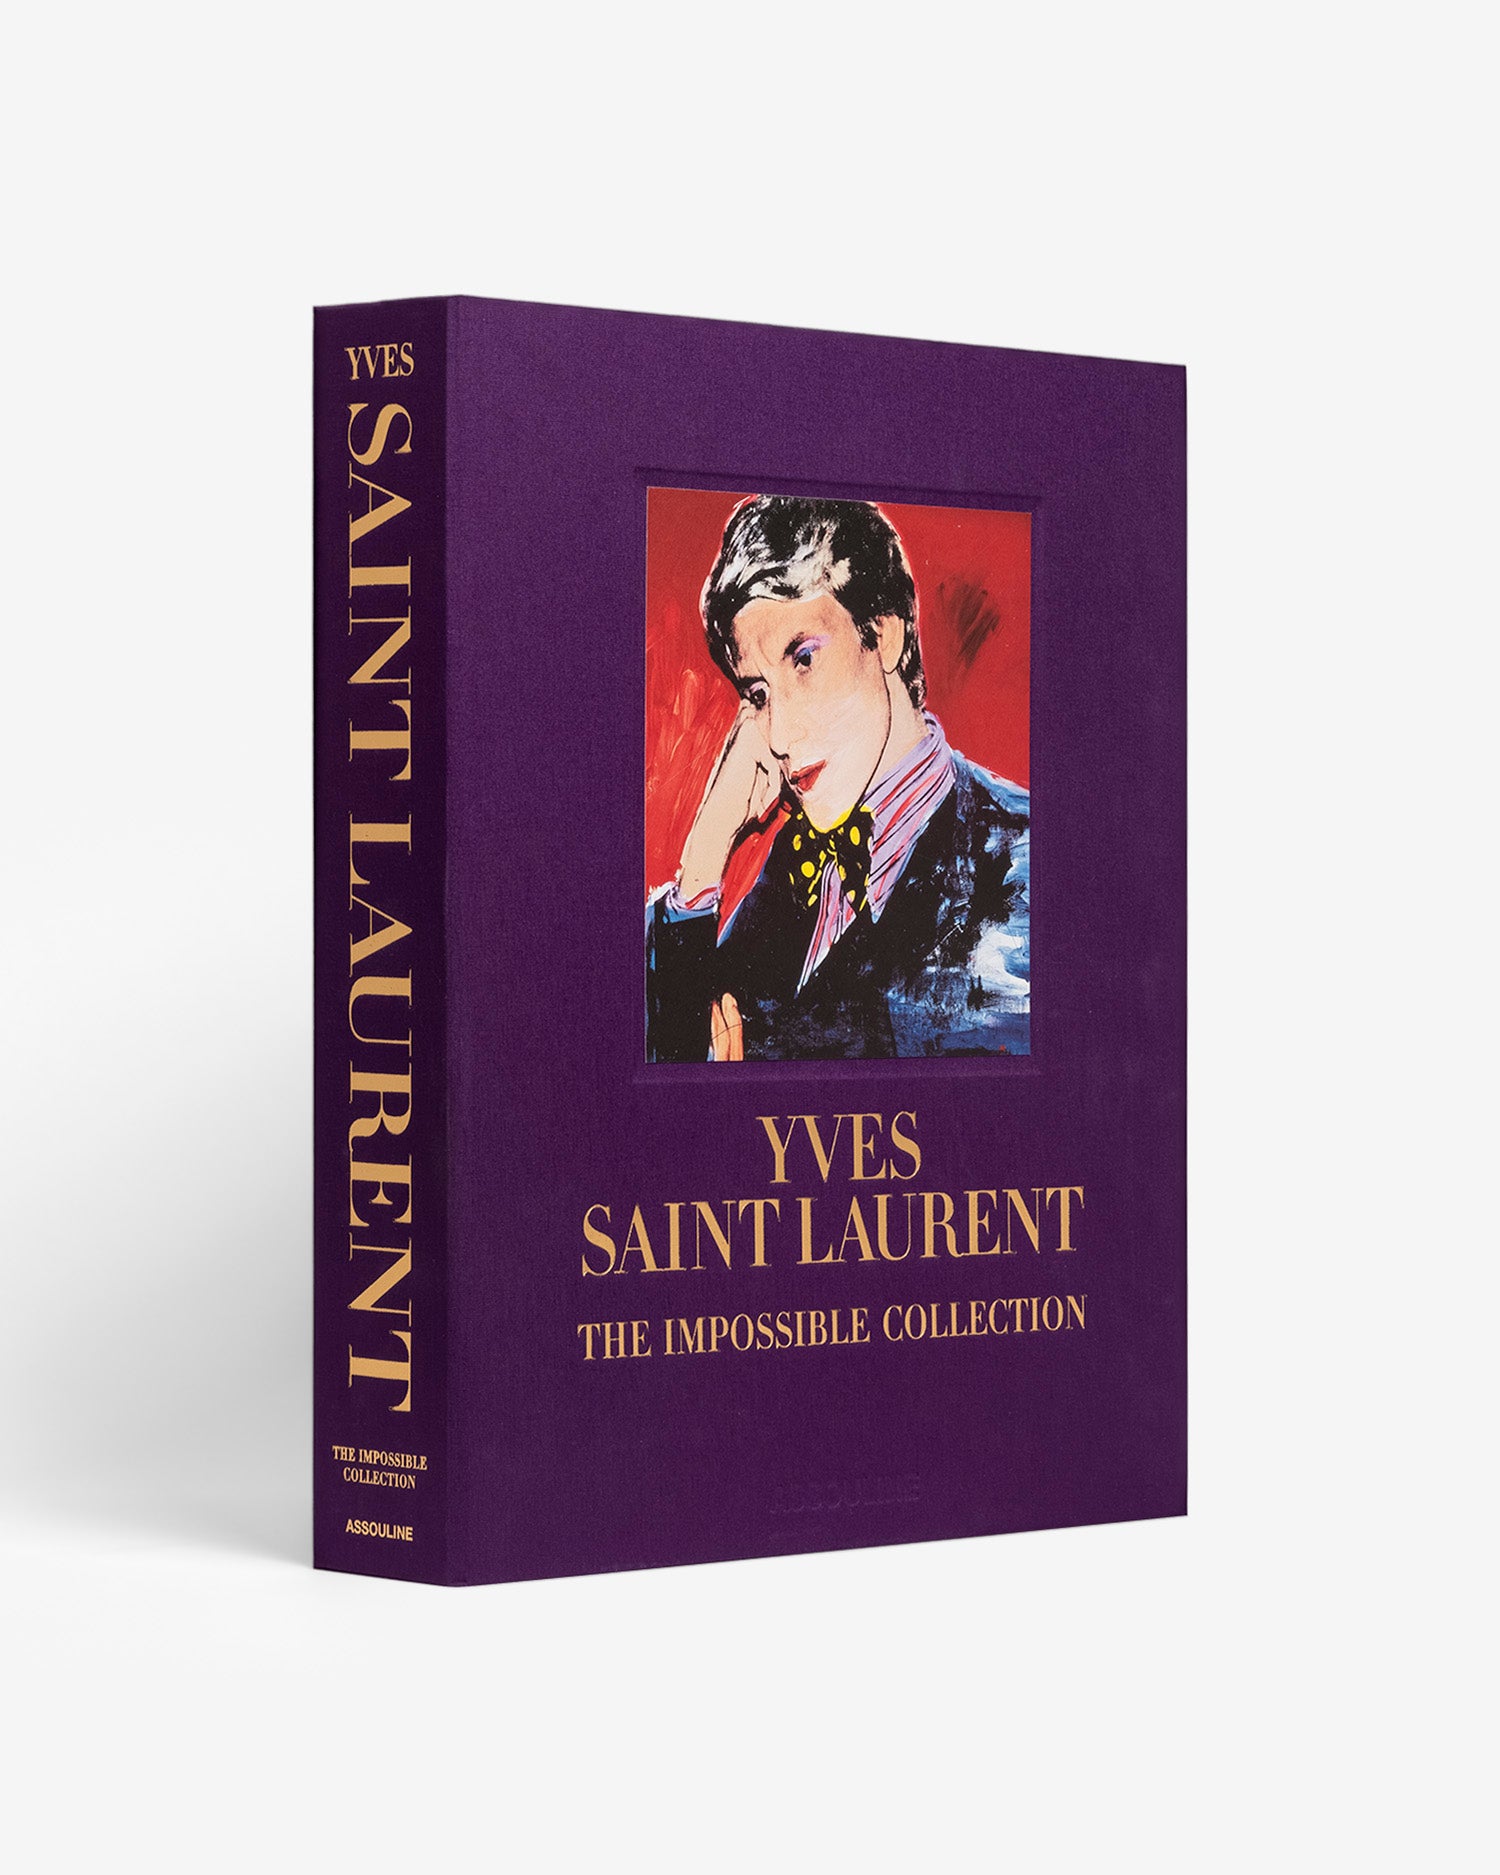 Yves Saint Laurent: The Impossible Collection book by ASSOULINE 